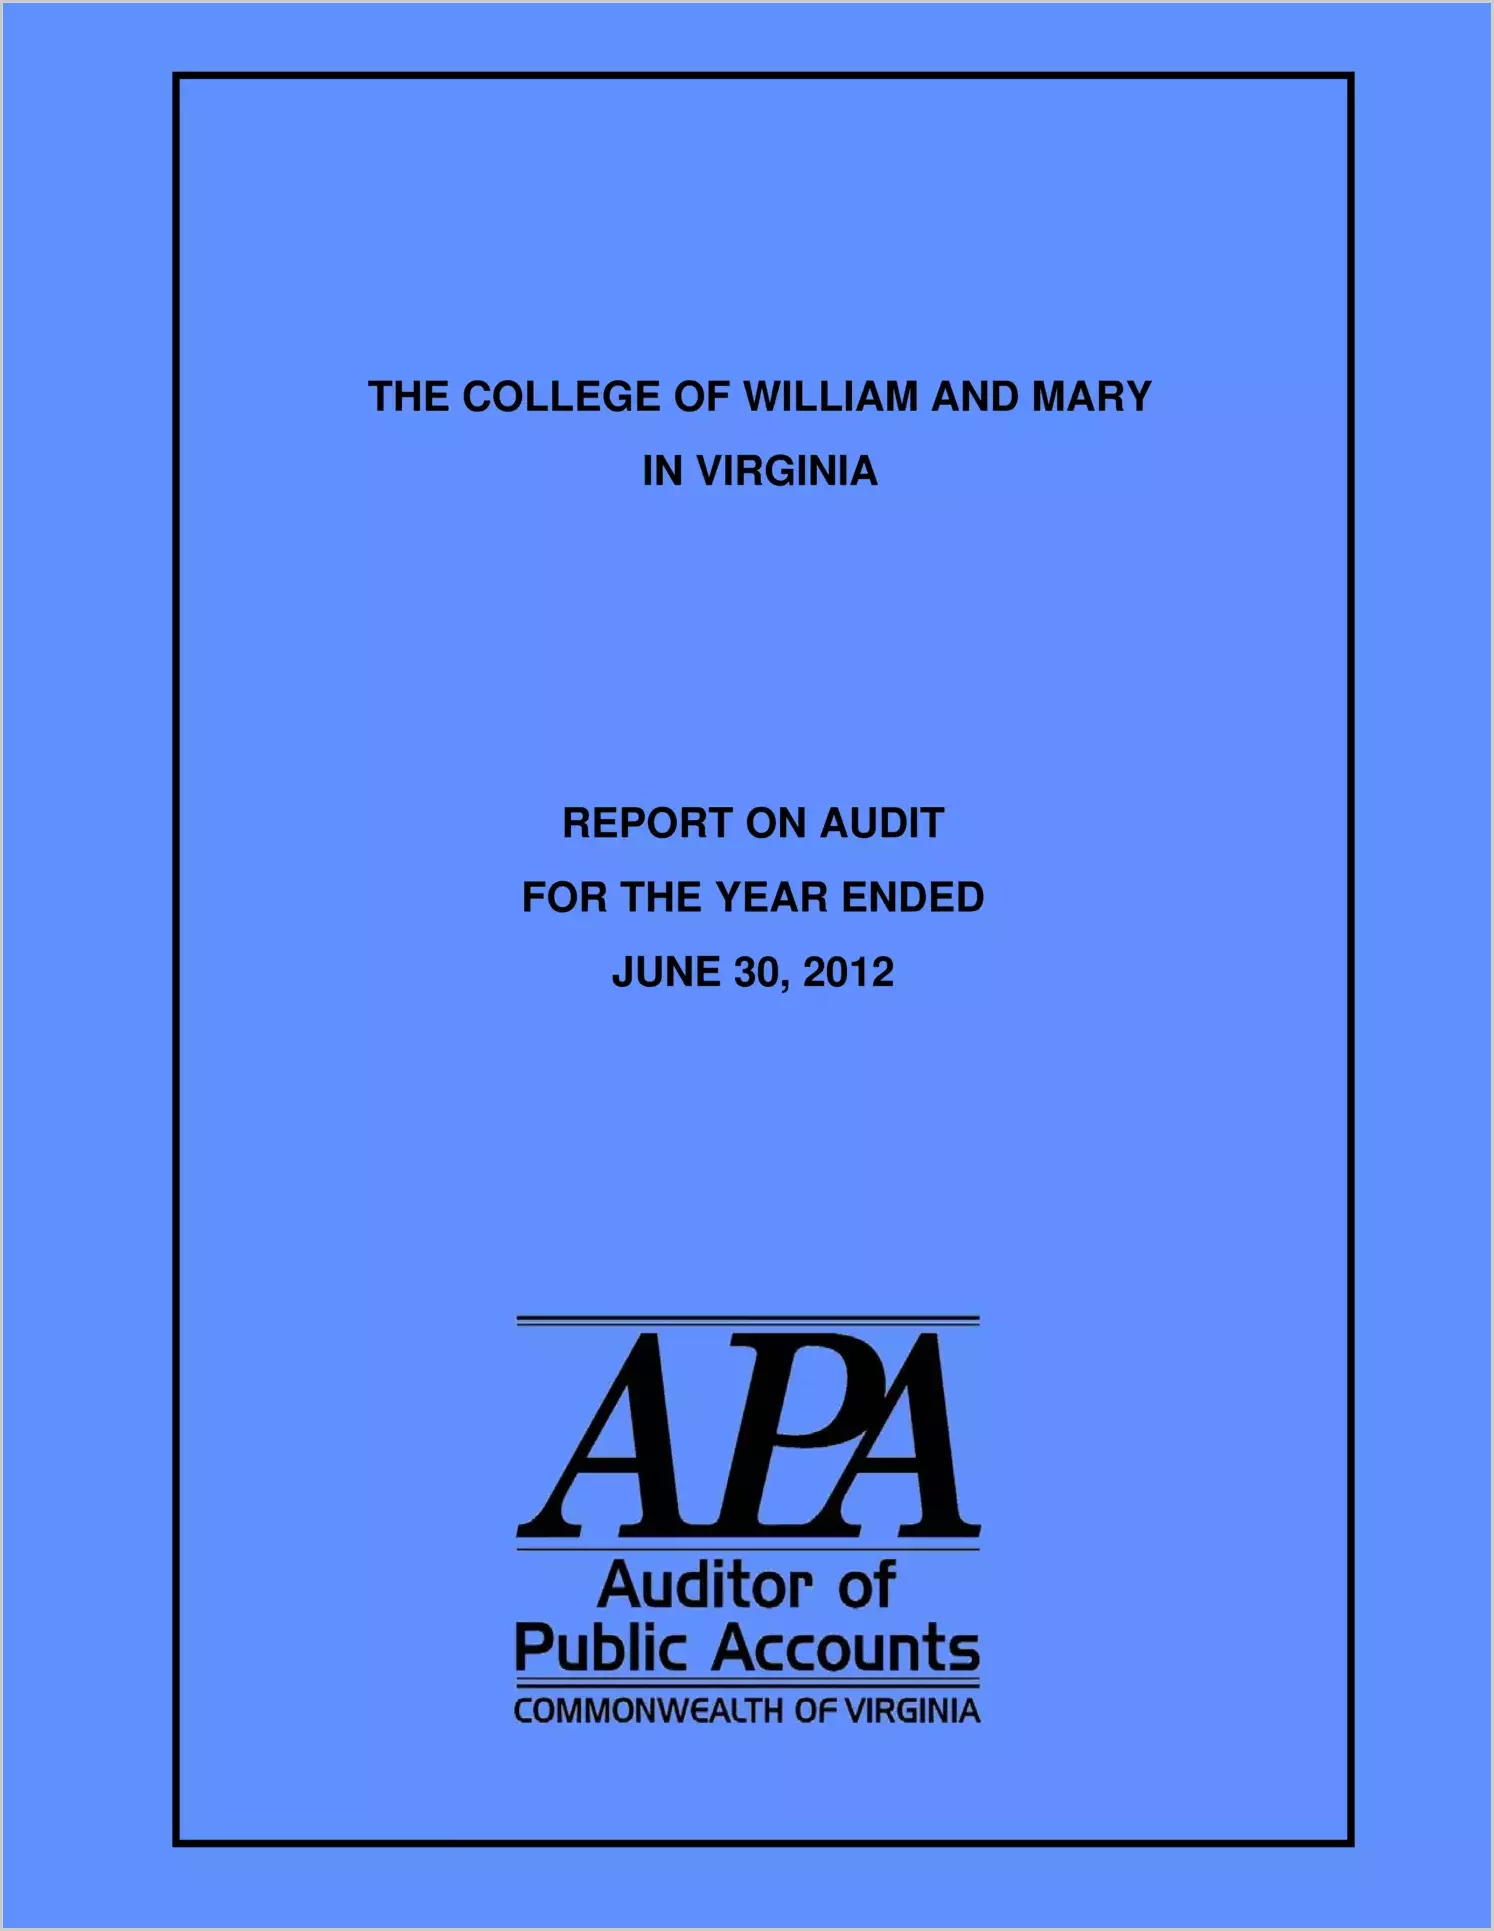 The College of William and Mary in Virginia for the year ended June 30, 2012